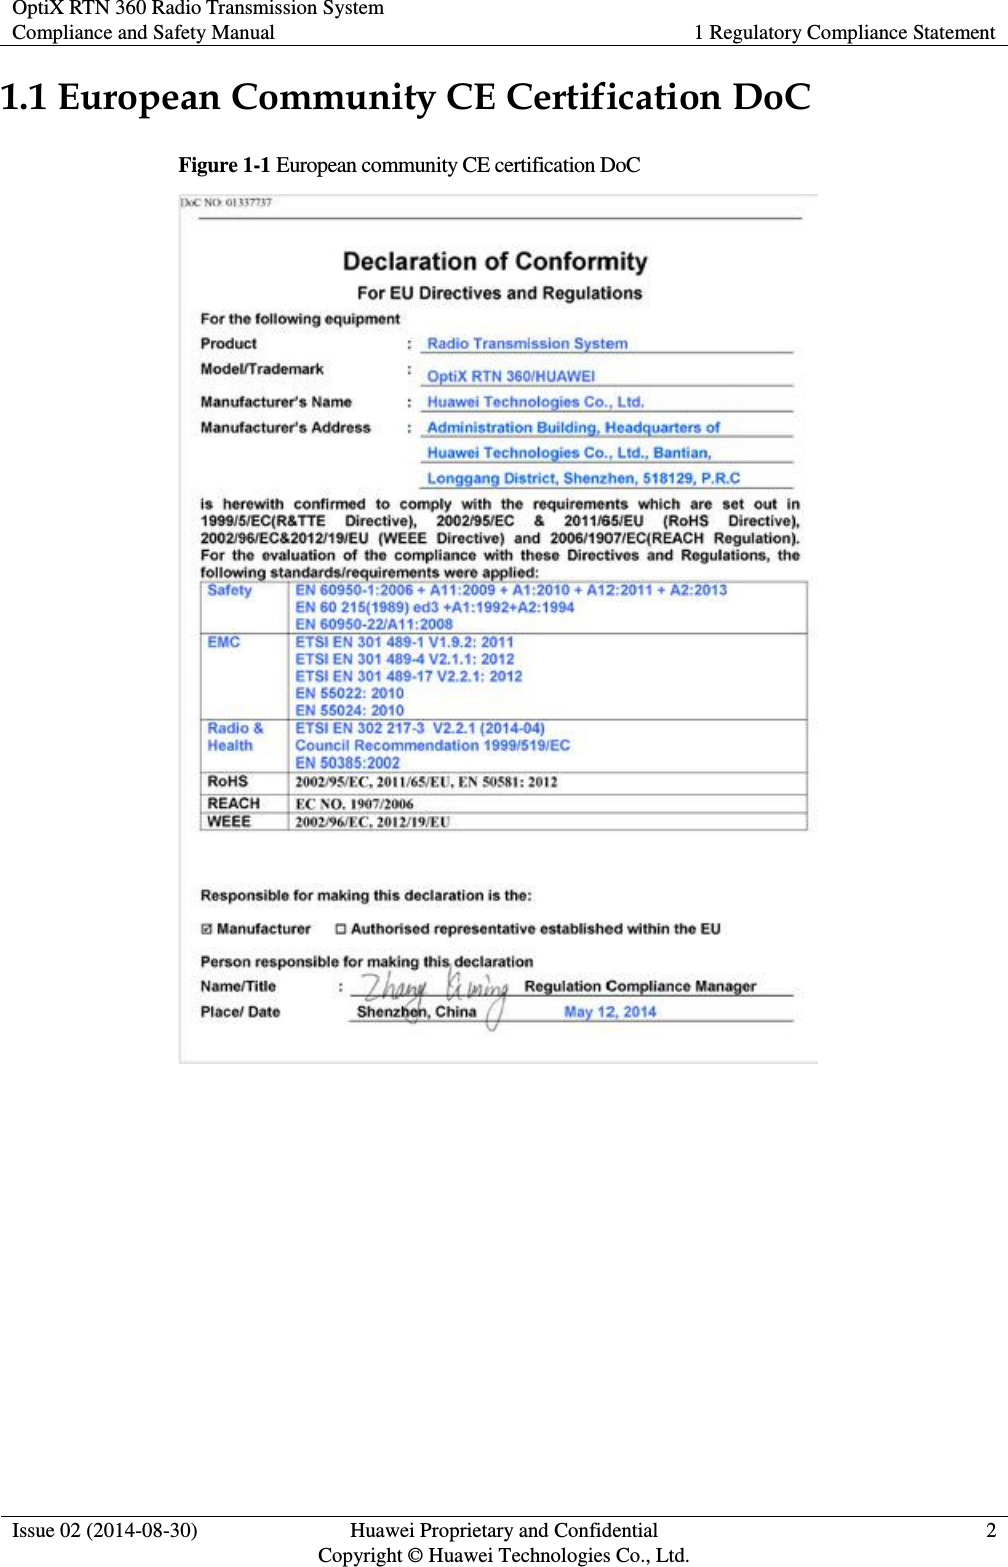 OptiX RTN 360 Radio Transmission System Compliance and Safety Manual 1 Regulatory Compliance Statement  Issue 02 (2014-08-30) Huawei Proprietary and Confidential                                     Copyright © Huawei Technologies Co., Ltd. 2  1.1 European Community CE Certification DoC Figure 1-1 European community CE certification DoC    